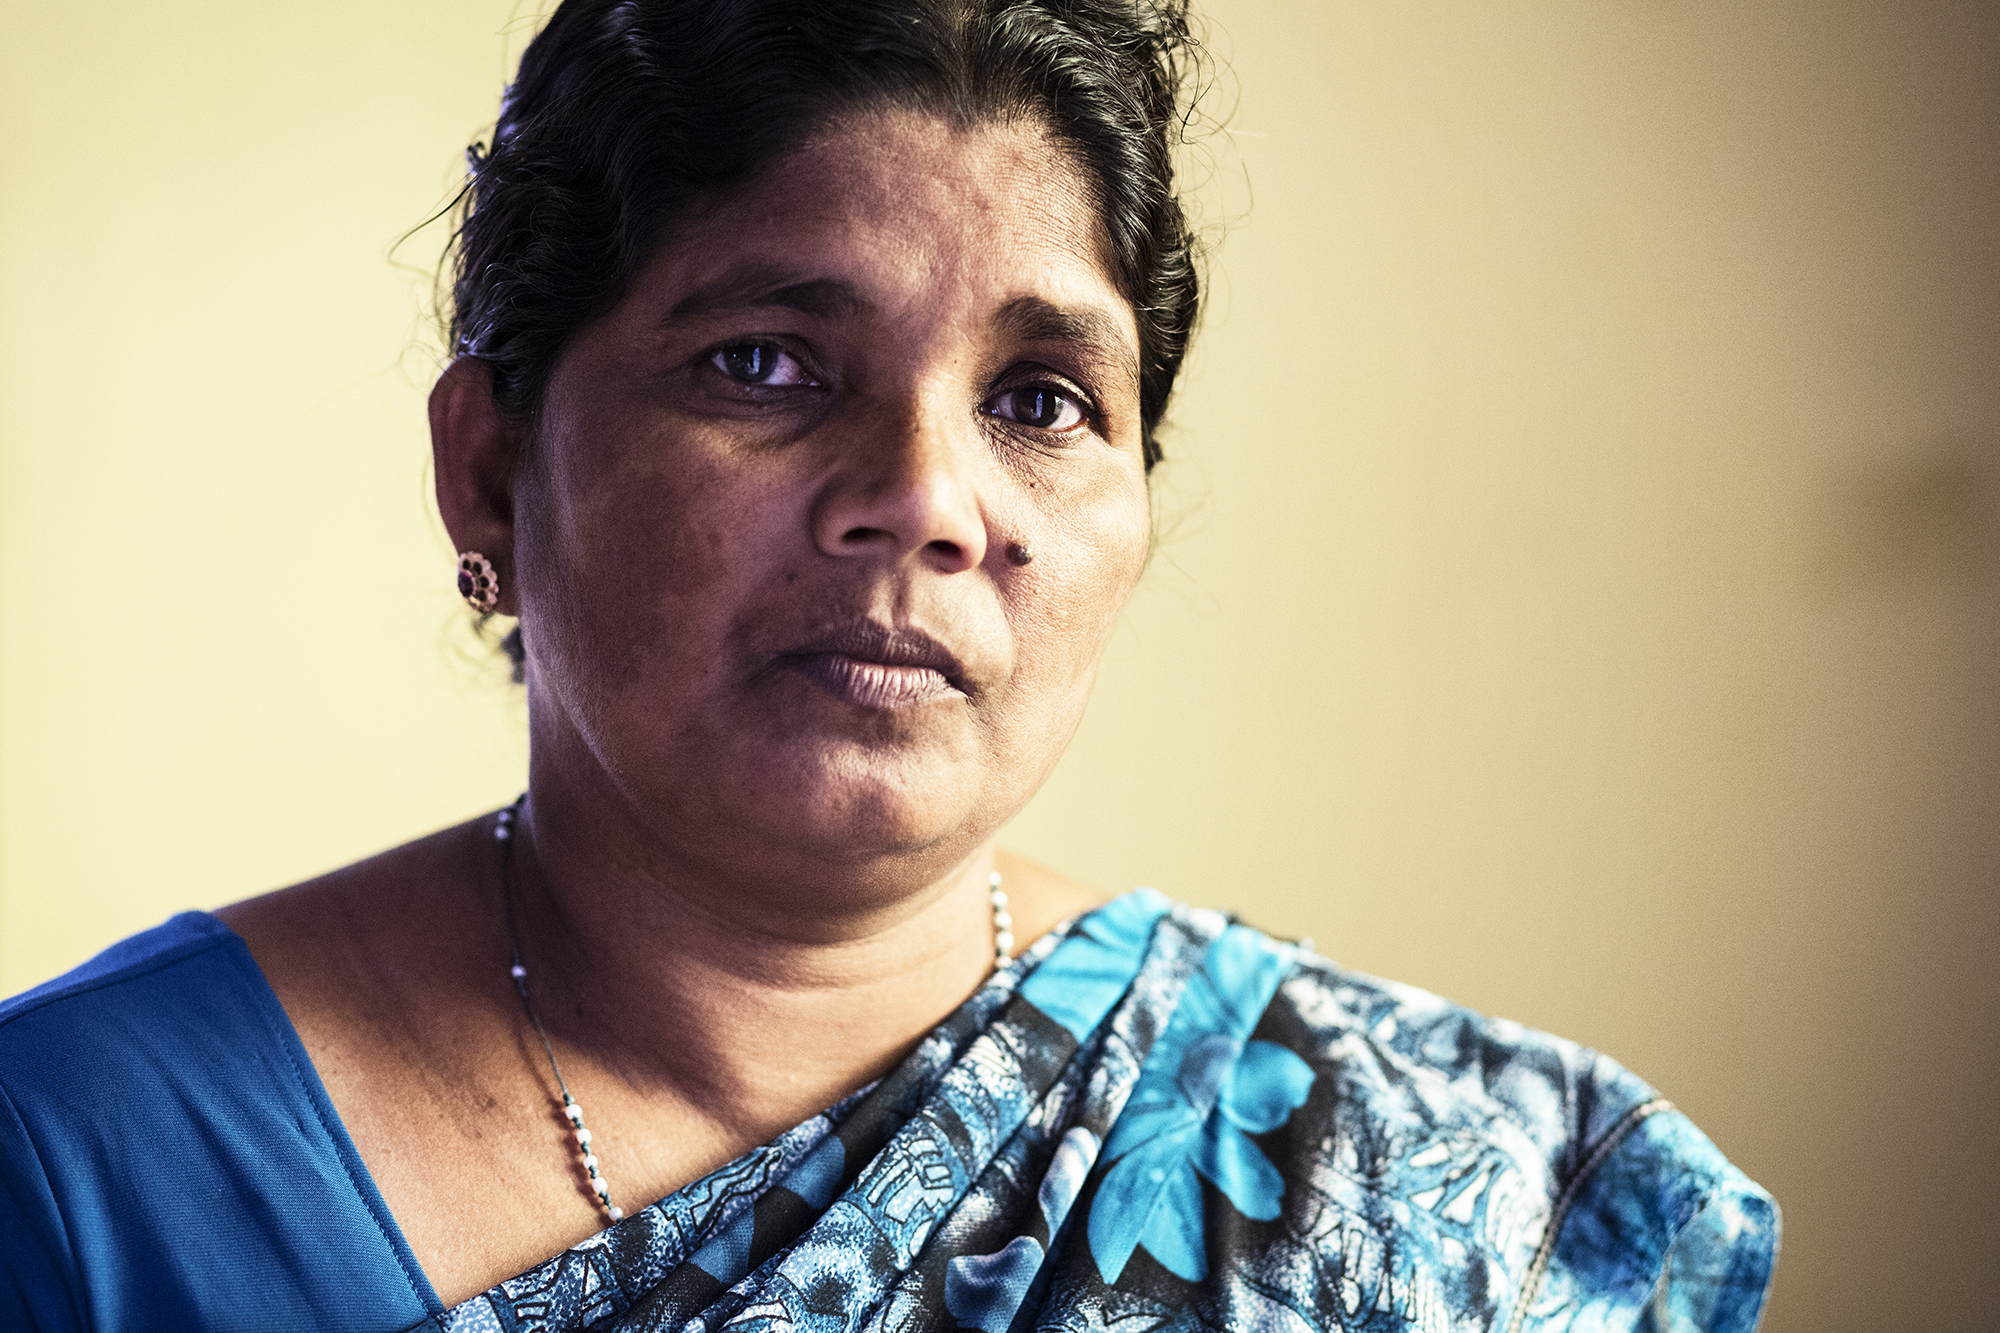  Immaculata, 47. Immaculata's oldest son was killed in the war in 2006. A year later, the army came to her home and took her younger son upon suspicion that he was involved in the LTTE. He spent several years imprisoned until he falsely confessed in 